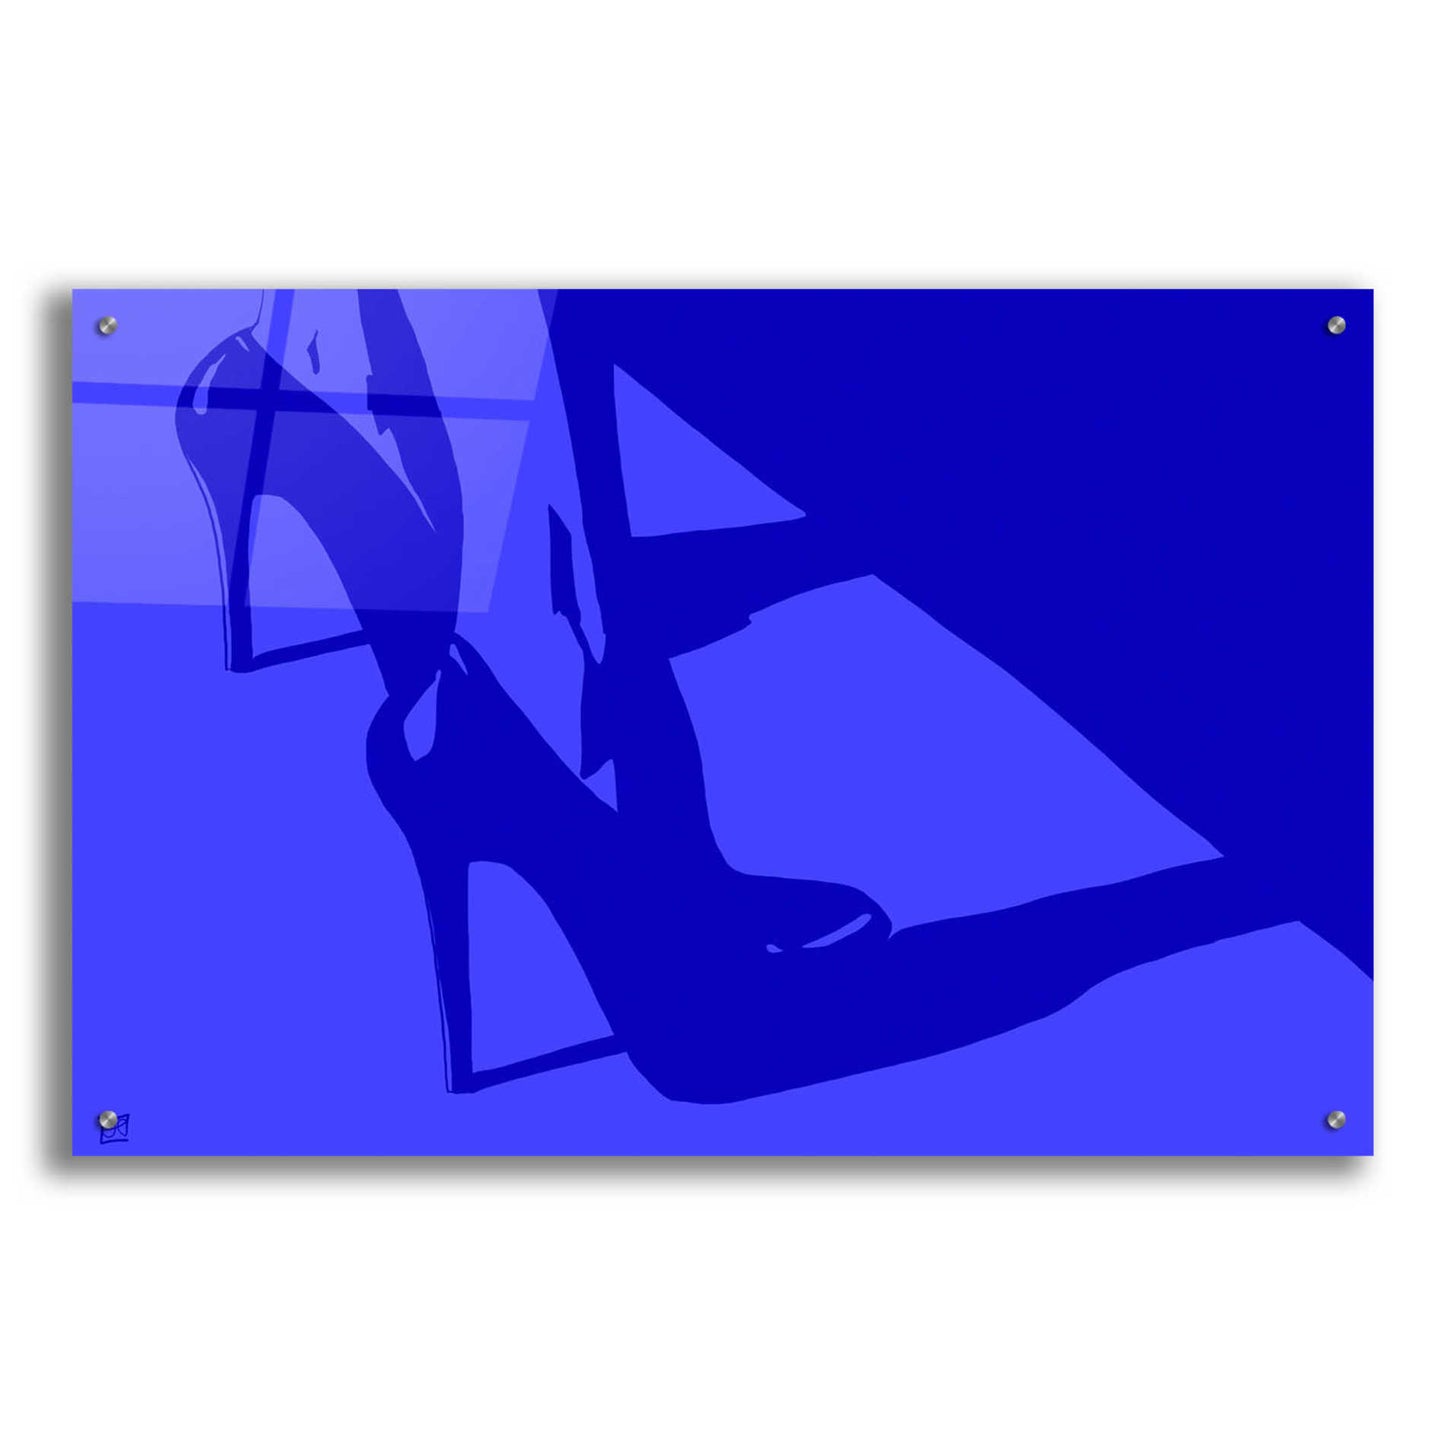 Epic Art 'Heels in blue' by Giuseppe Cristiano, Acrylic Glass Wall Art,36x24